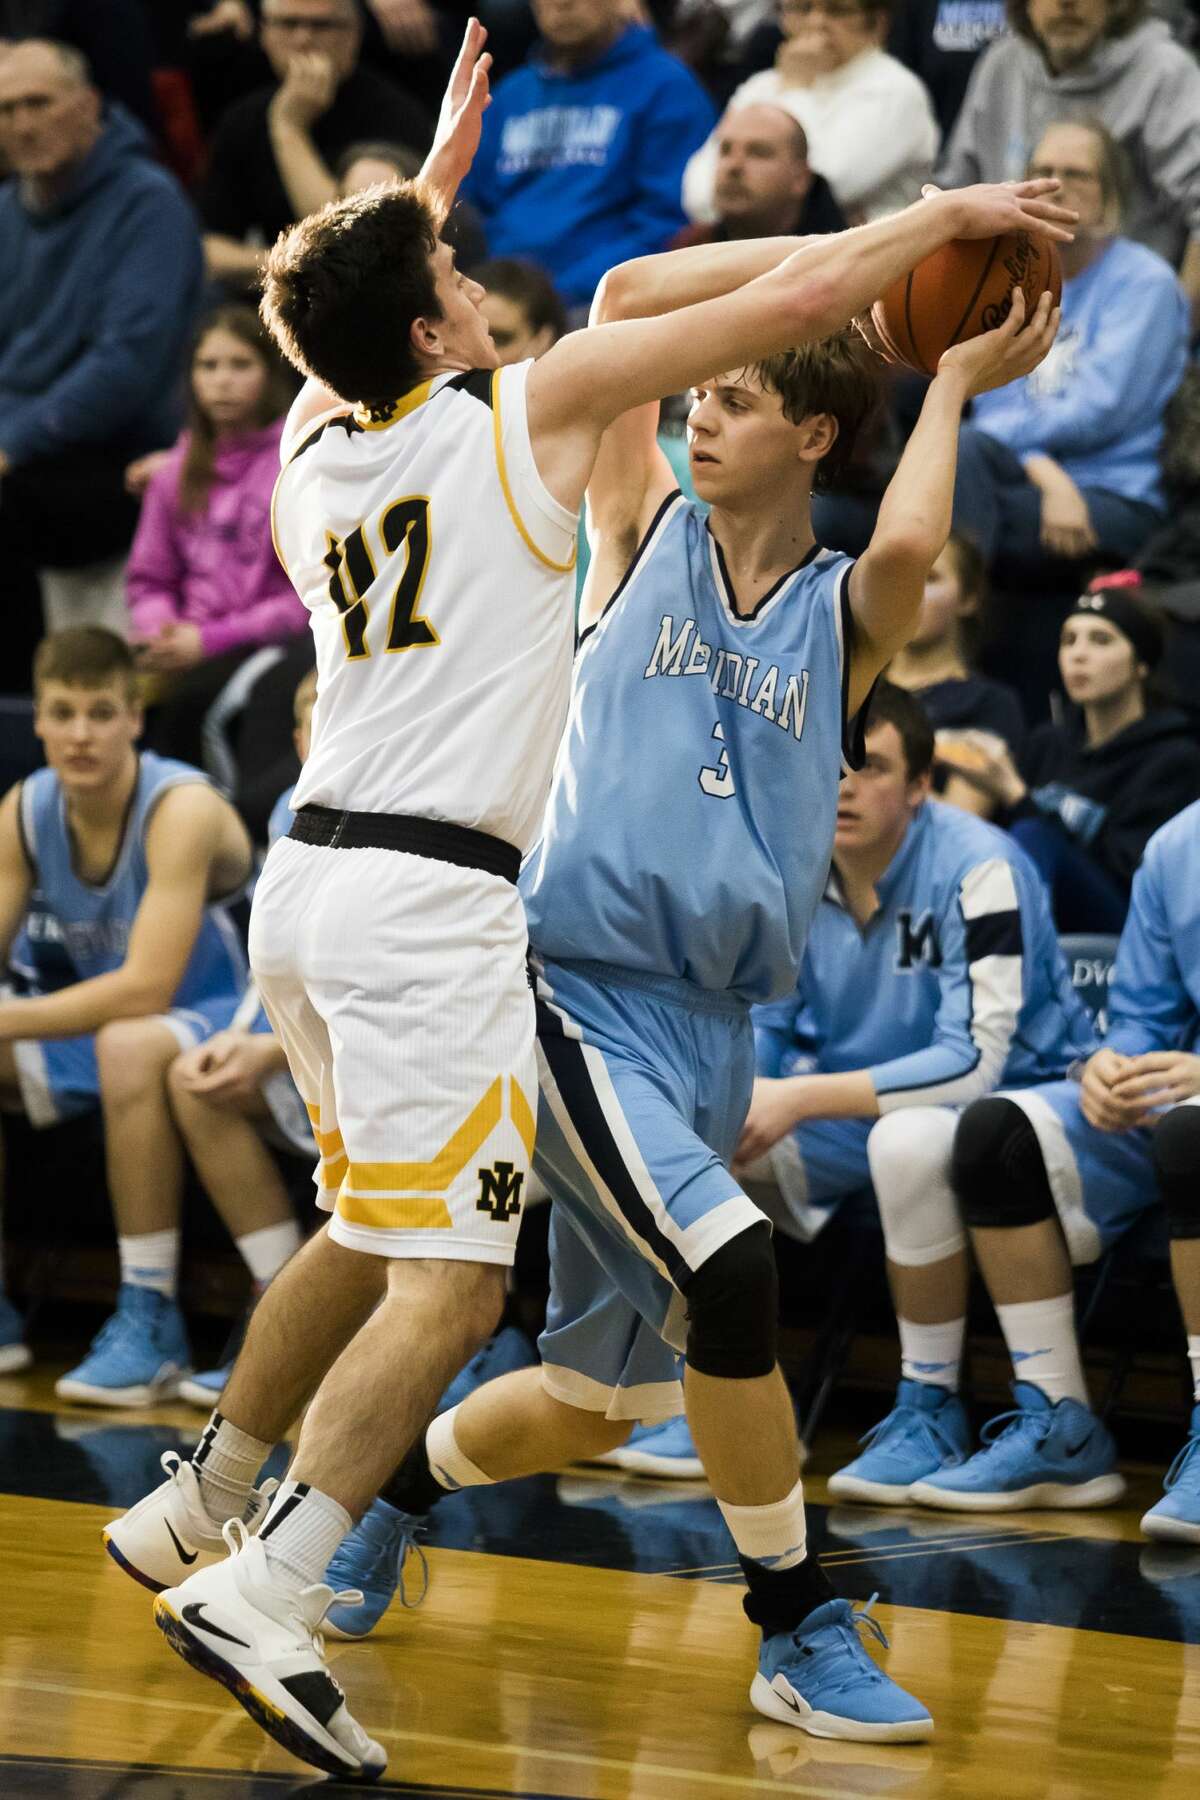 Meridian's Lucas Lueder looks for a teammate to pass to during the Mustangs' 56-61 Division 3 state quarterfinals loss to Iron Mountain on Tuesday, March 12, 2019 at Petoskey High School. (Katy Kildee/kkildee@mdn.net)